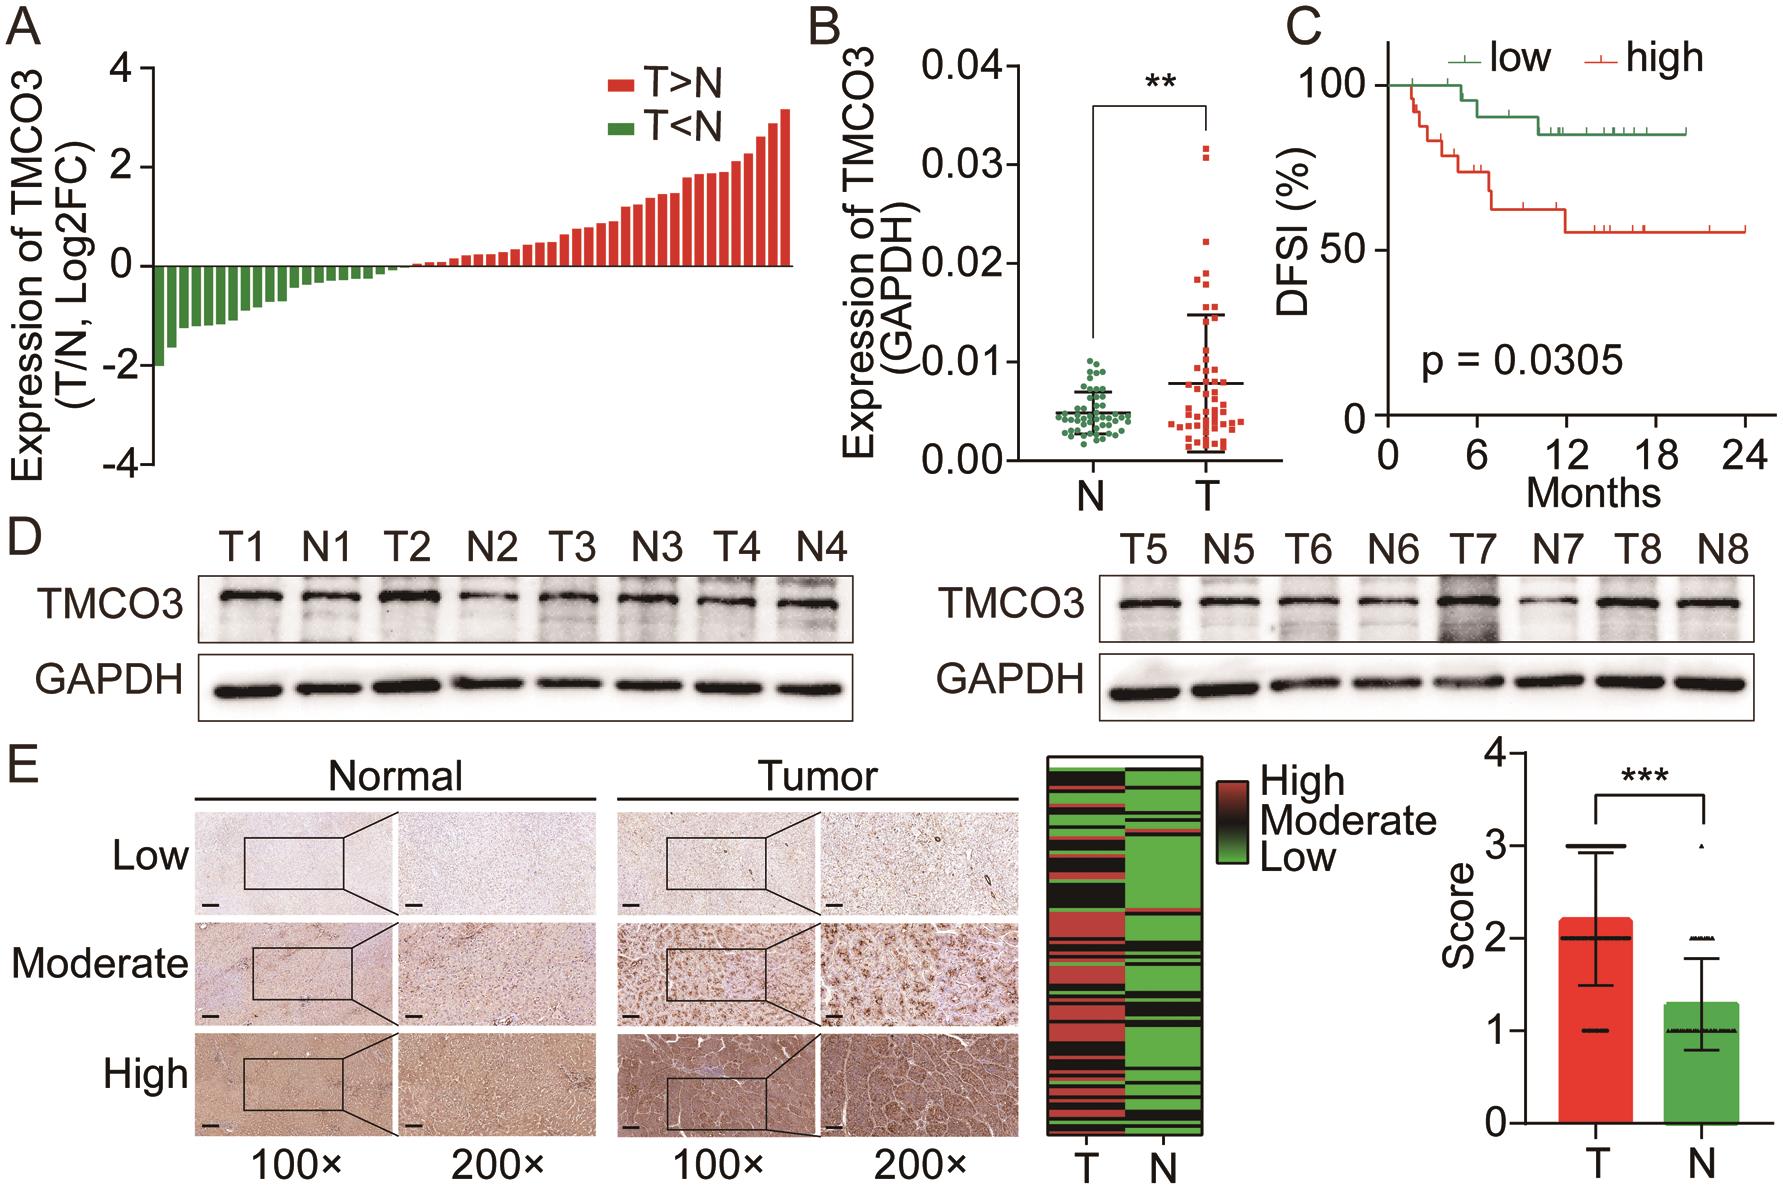 Validation of TMCO3 expression in the HCC cohort from our institution.